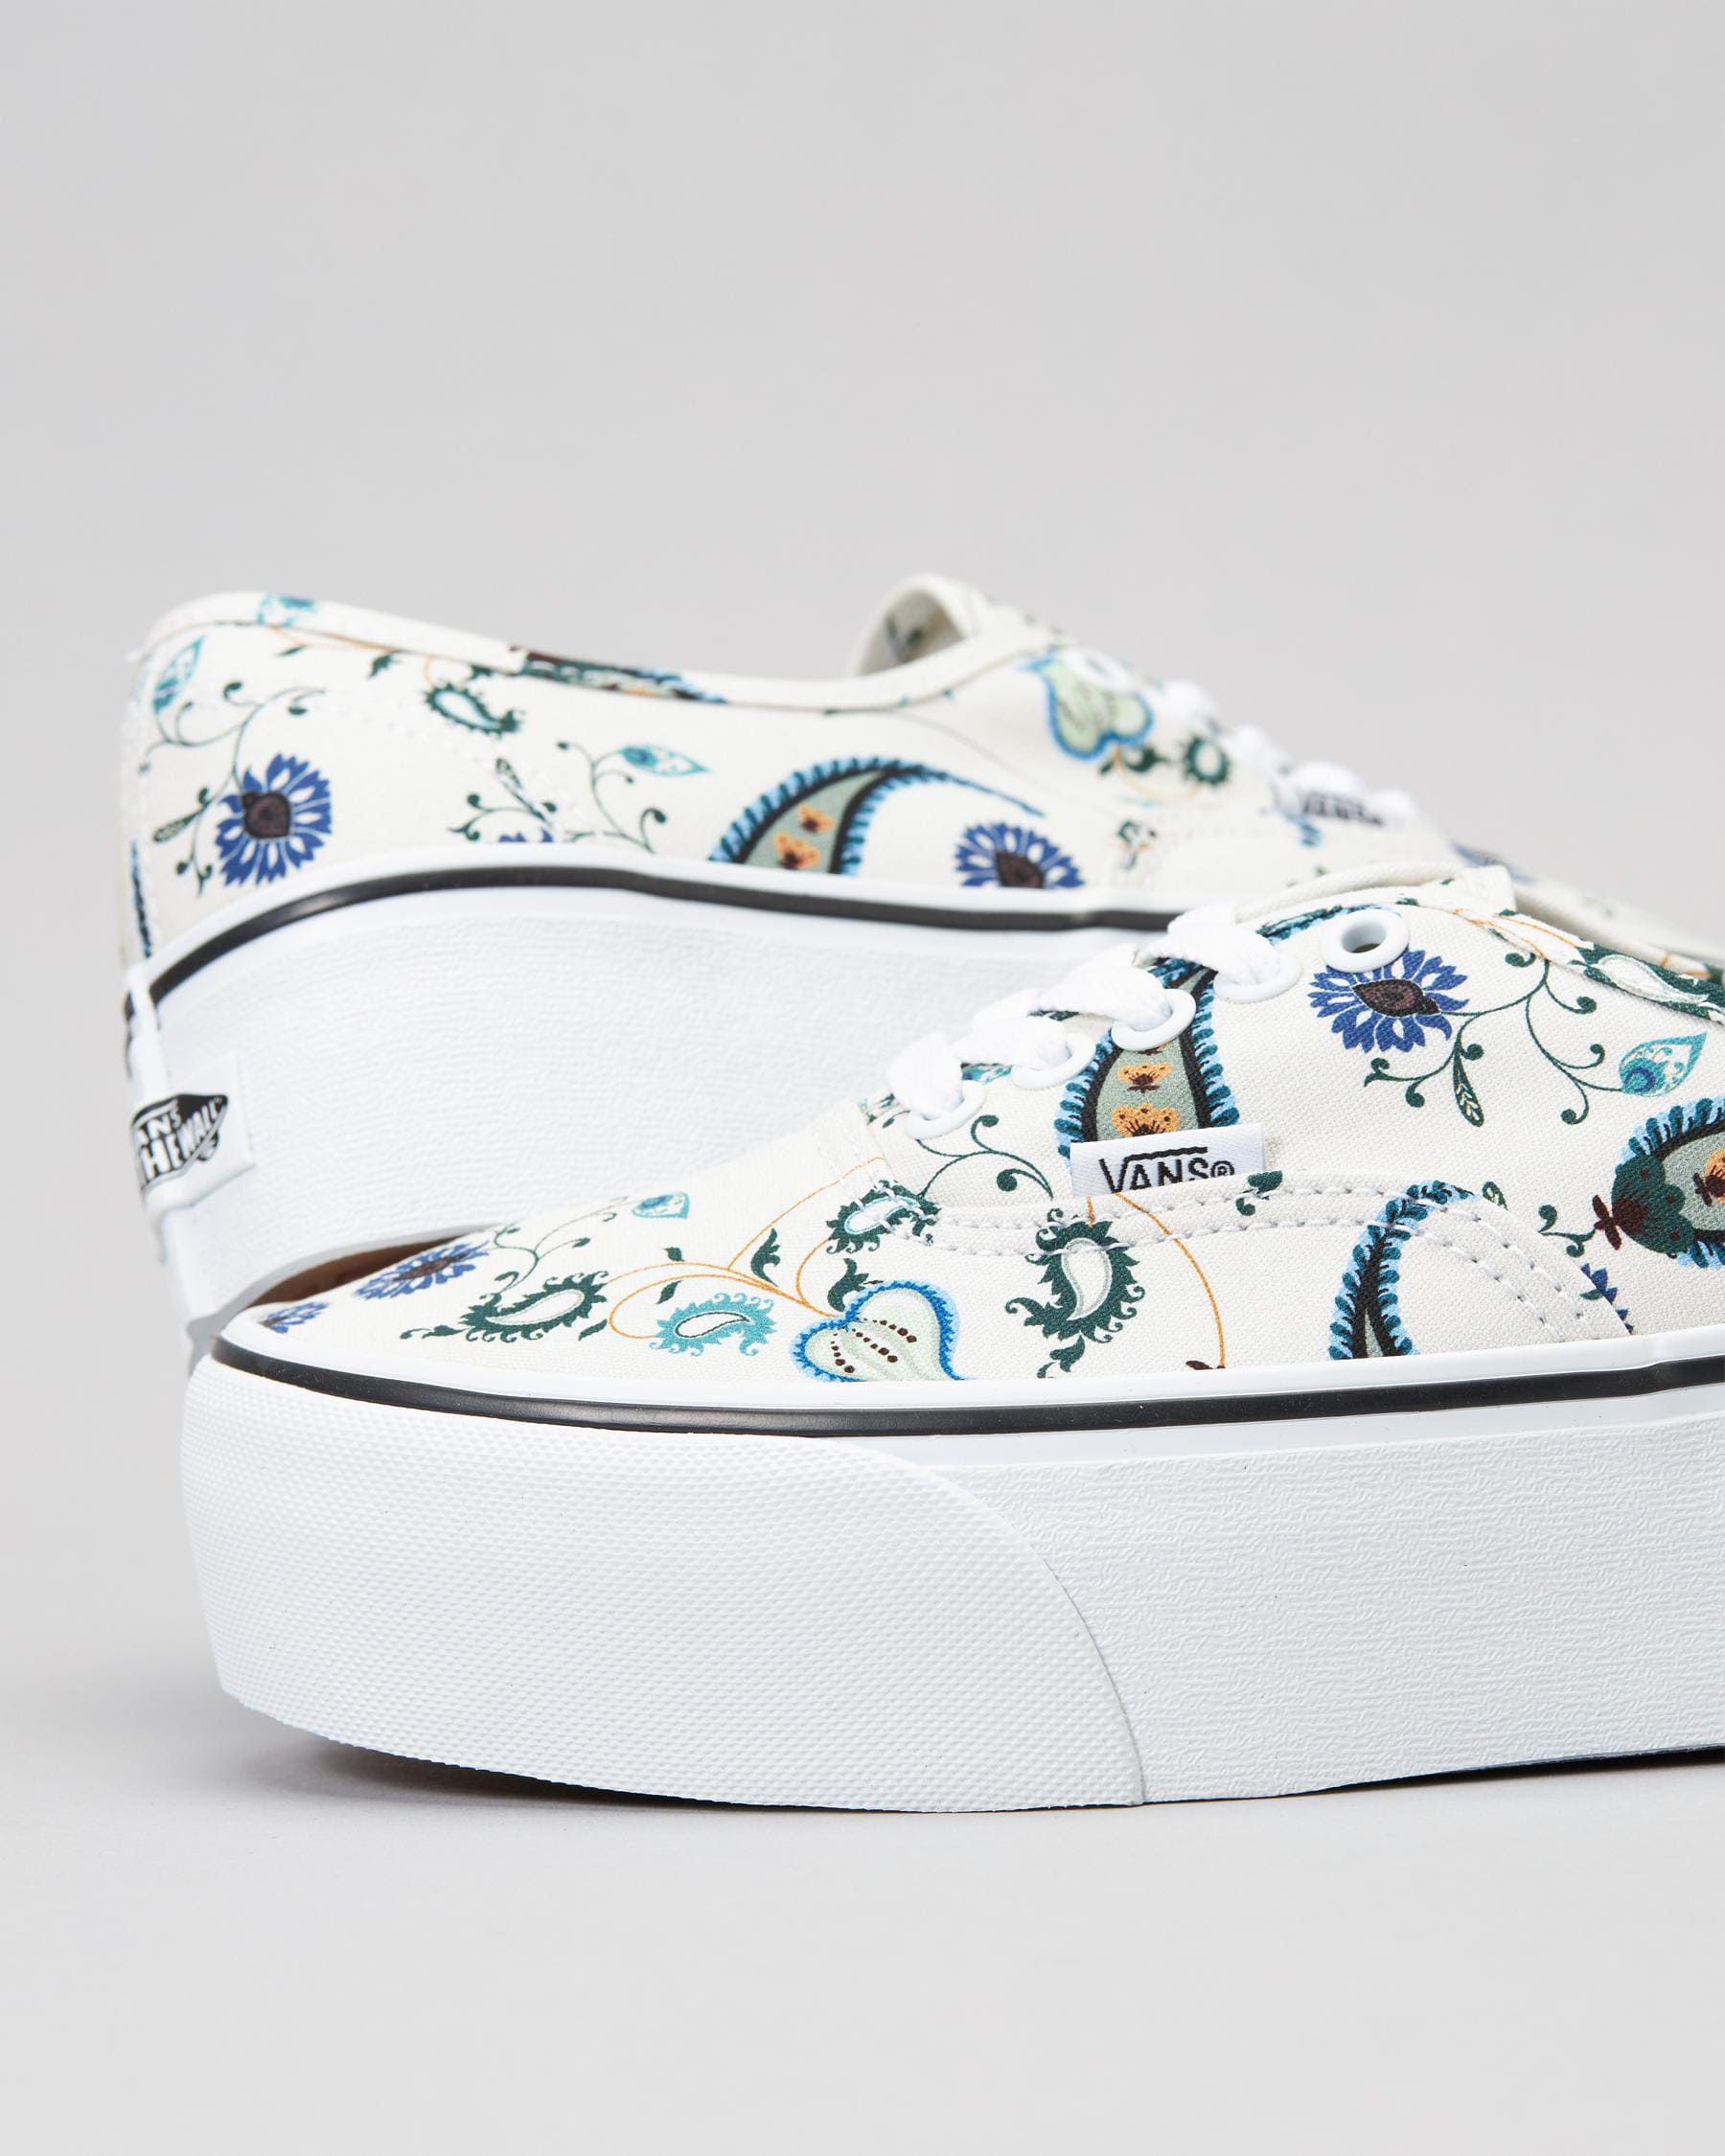 Vans Womens Authentic Stackform Shoes In Paisley Bloom Black/multi ...